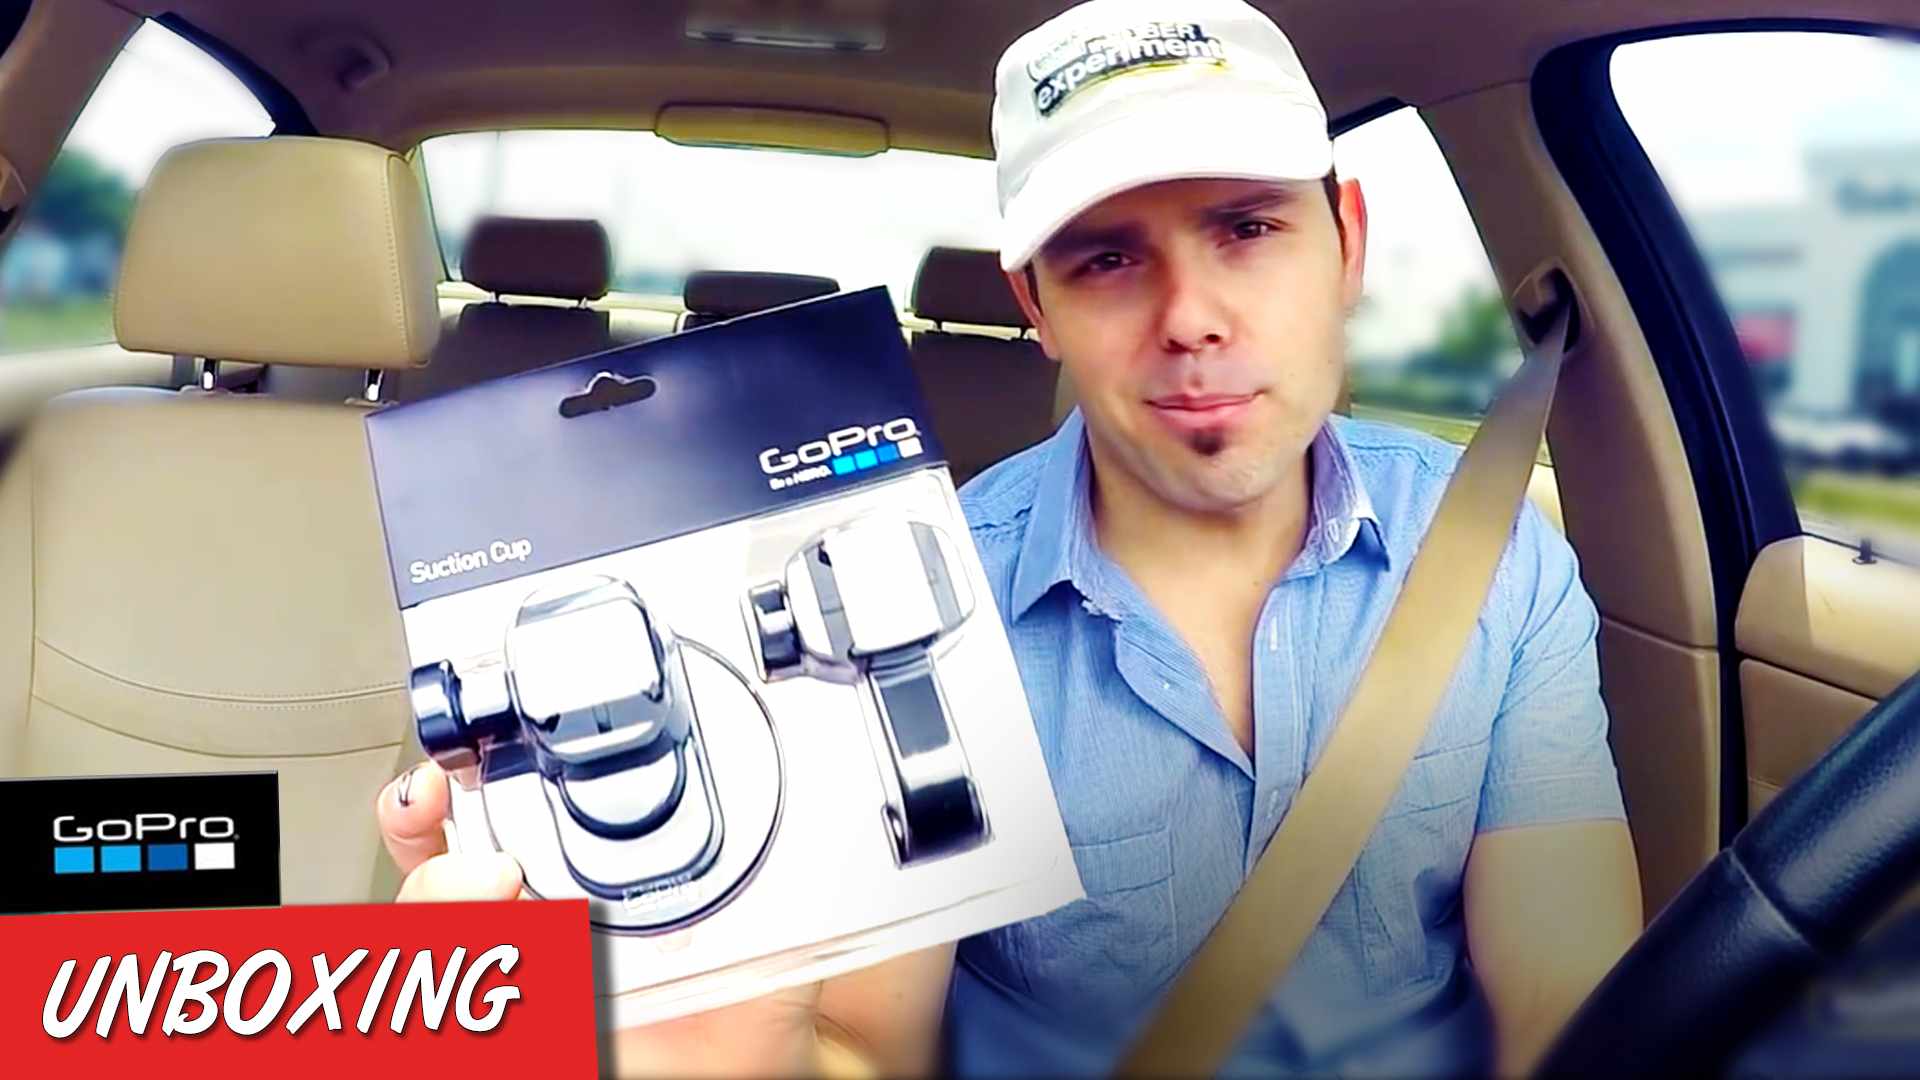 GOPRO SUCTION CUP Mount Unboxing, Road Test & FULL Review - Gadget Reviews on The Uber Experiment